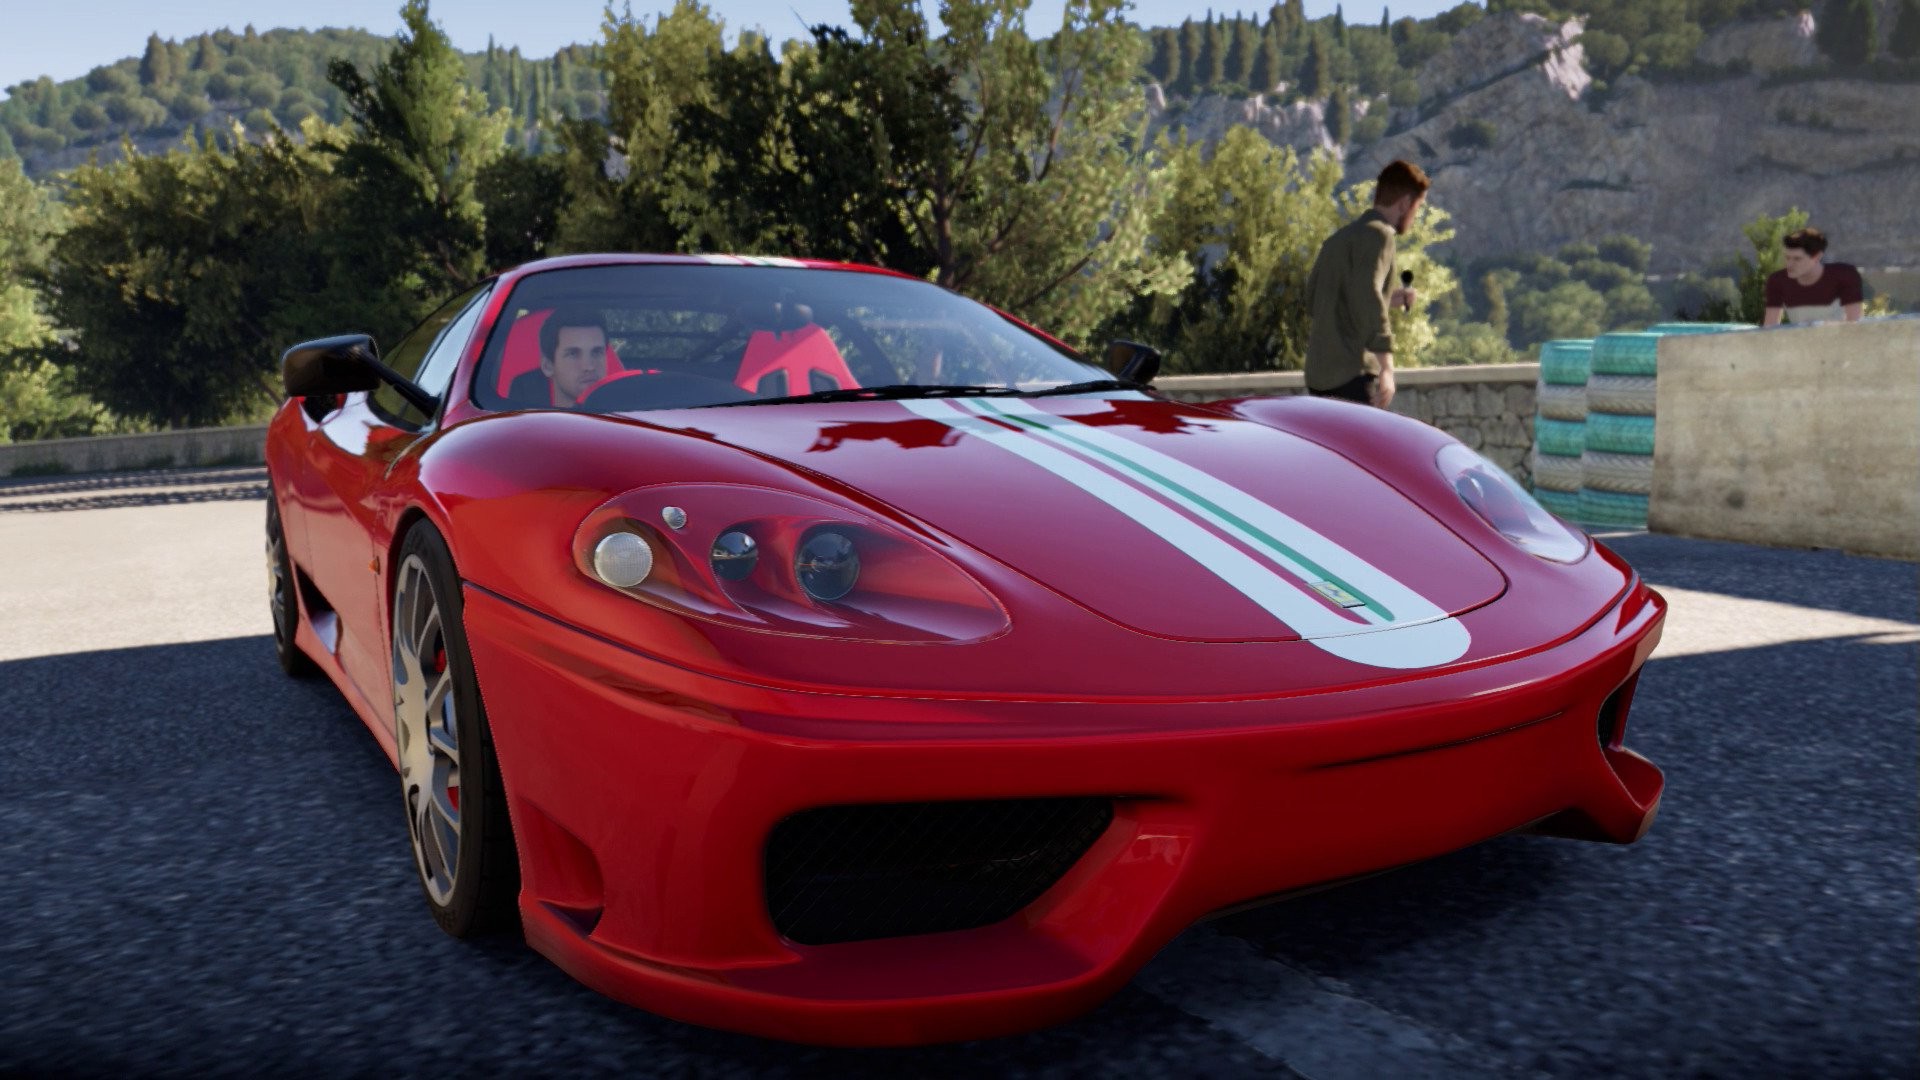 forza horizon 4 system requirements